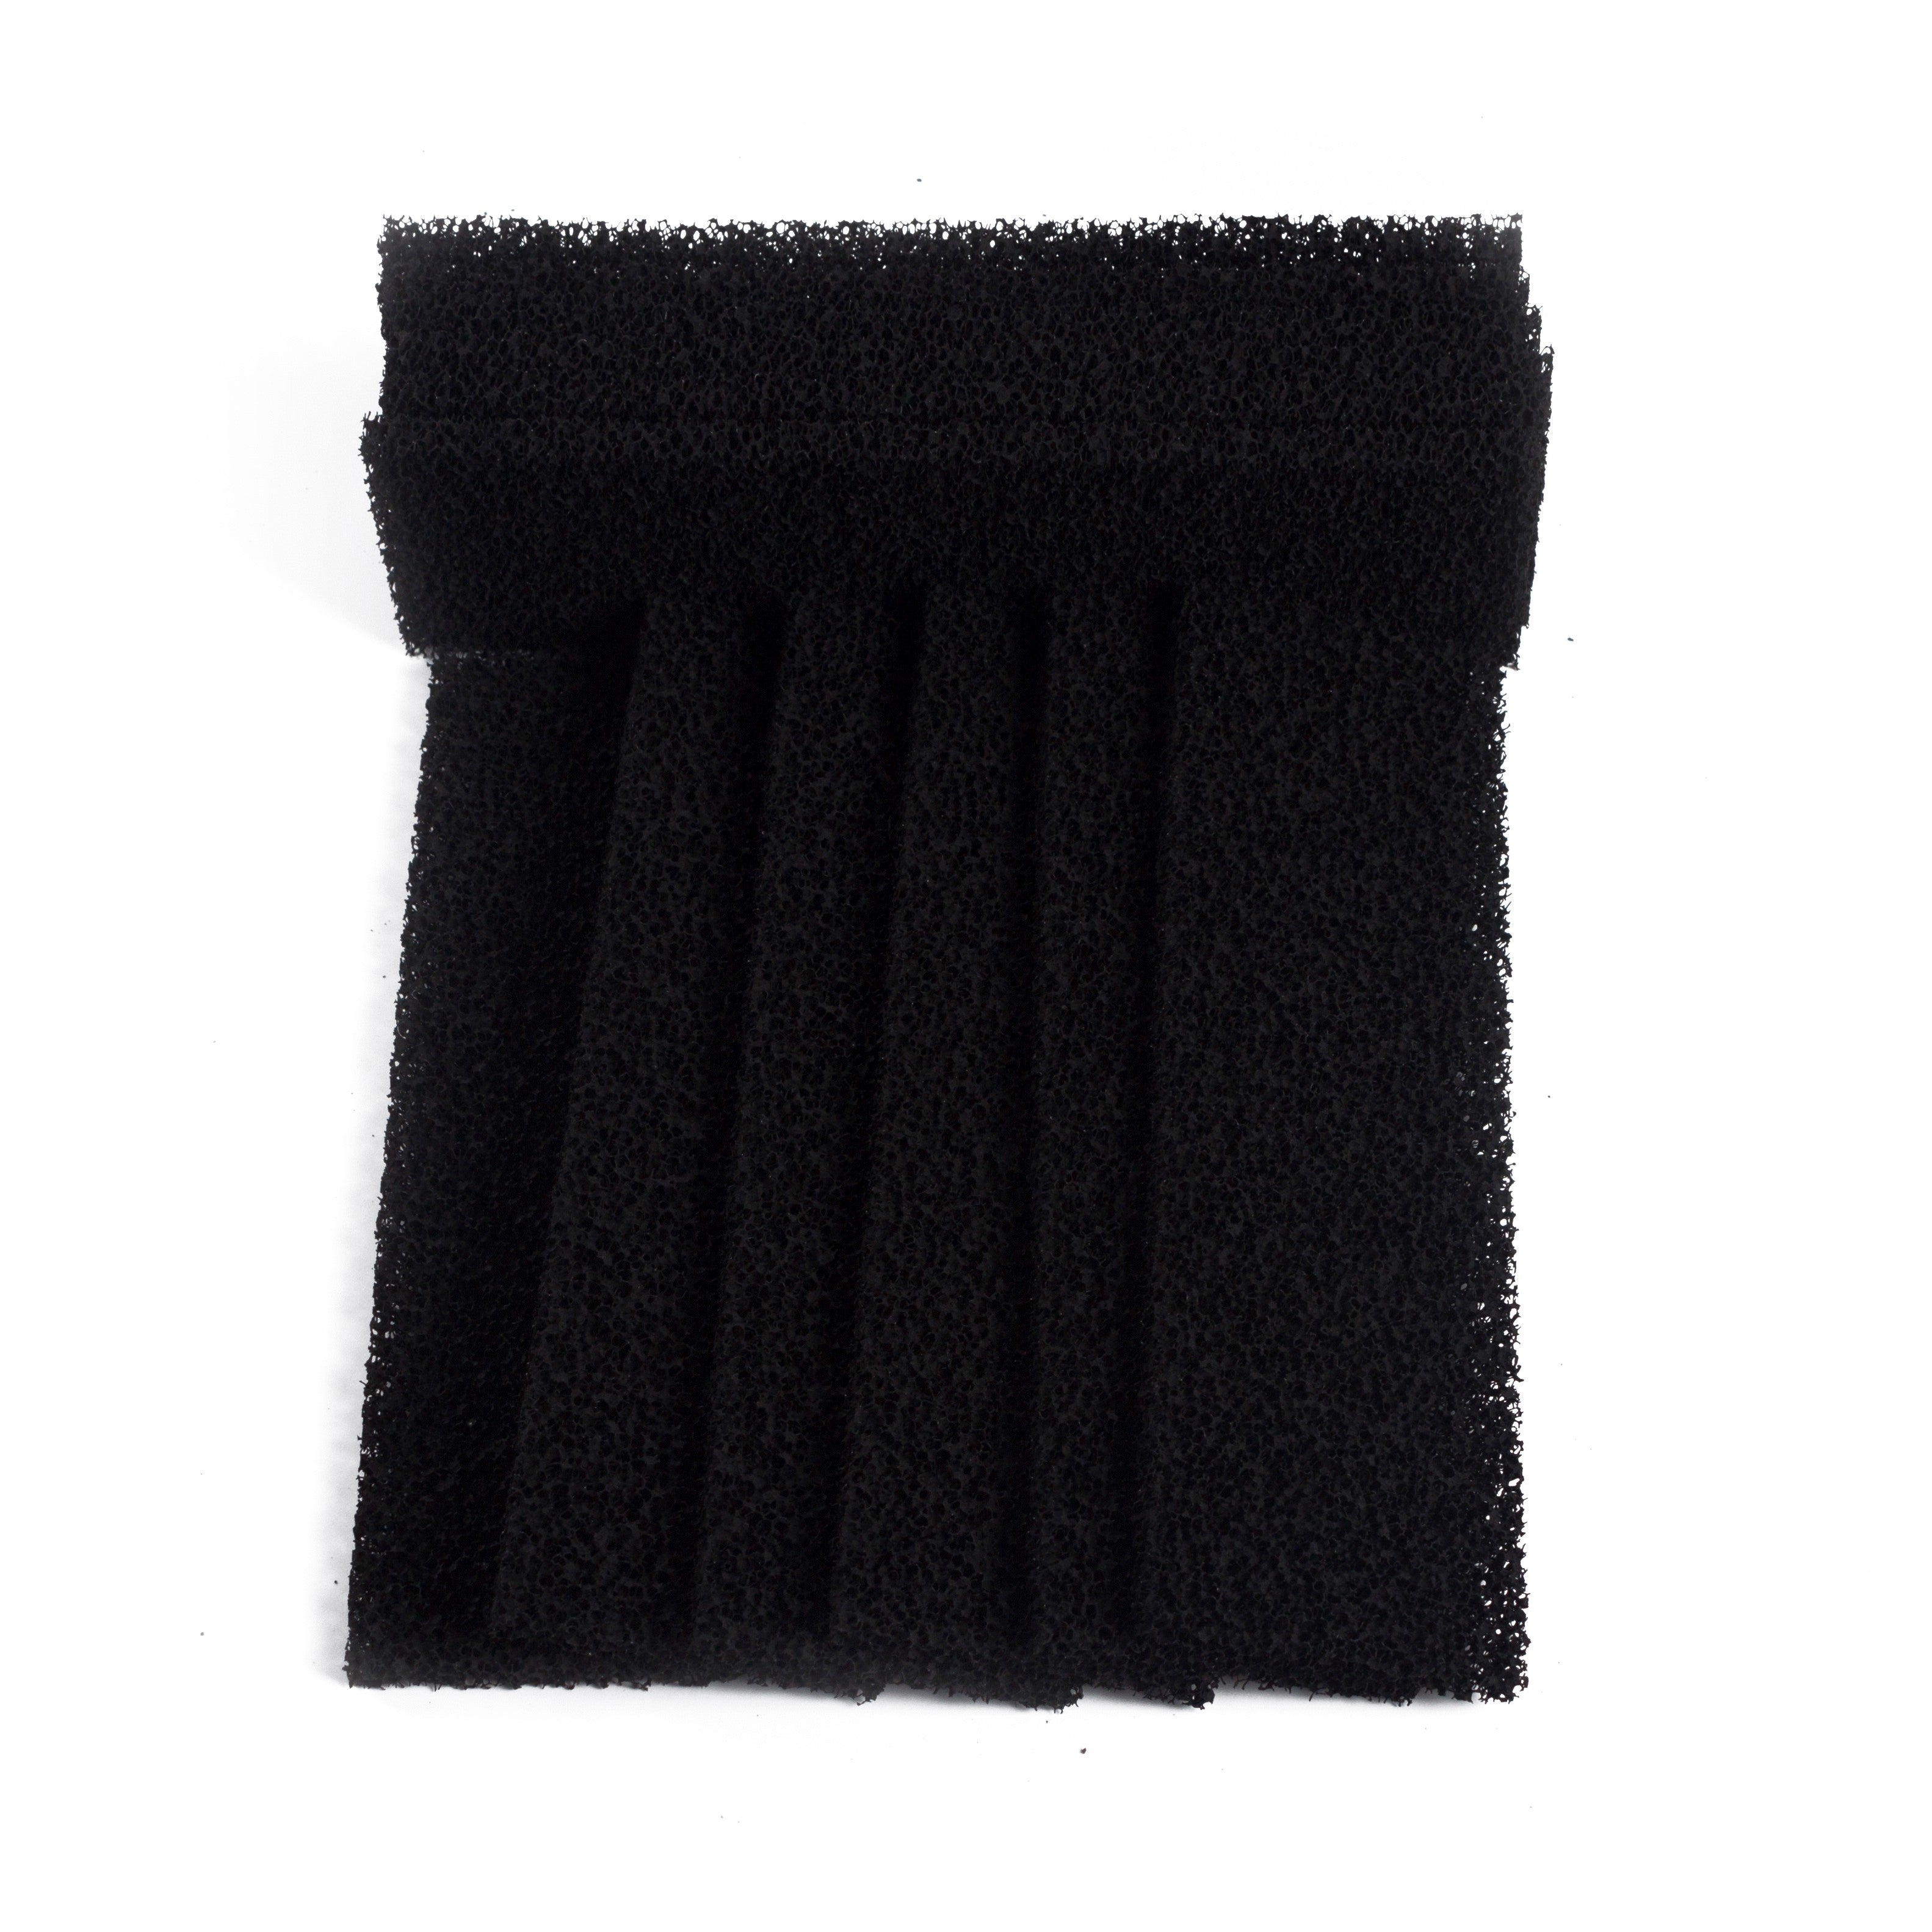 LTWHOME Compatible Carbon Foam Filters Non But Suitable for Fluval U3 Filter (Pack of 12)